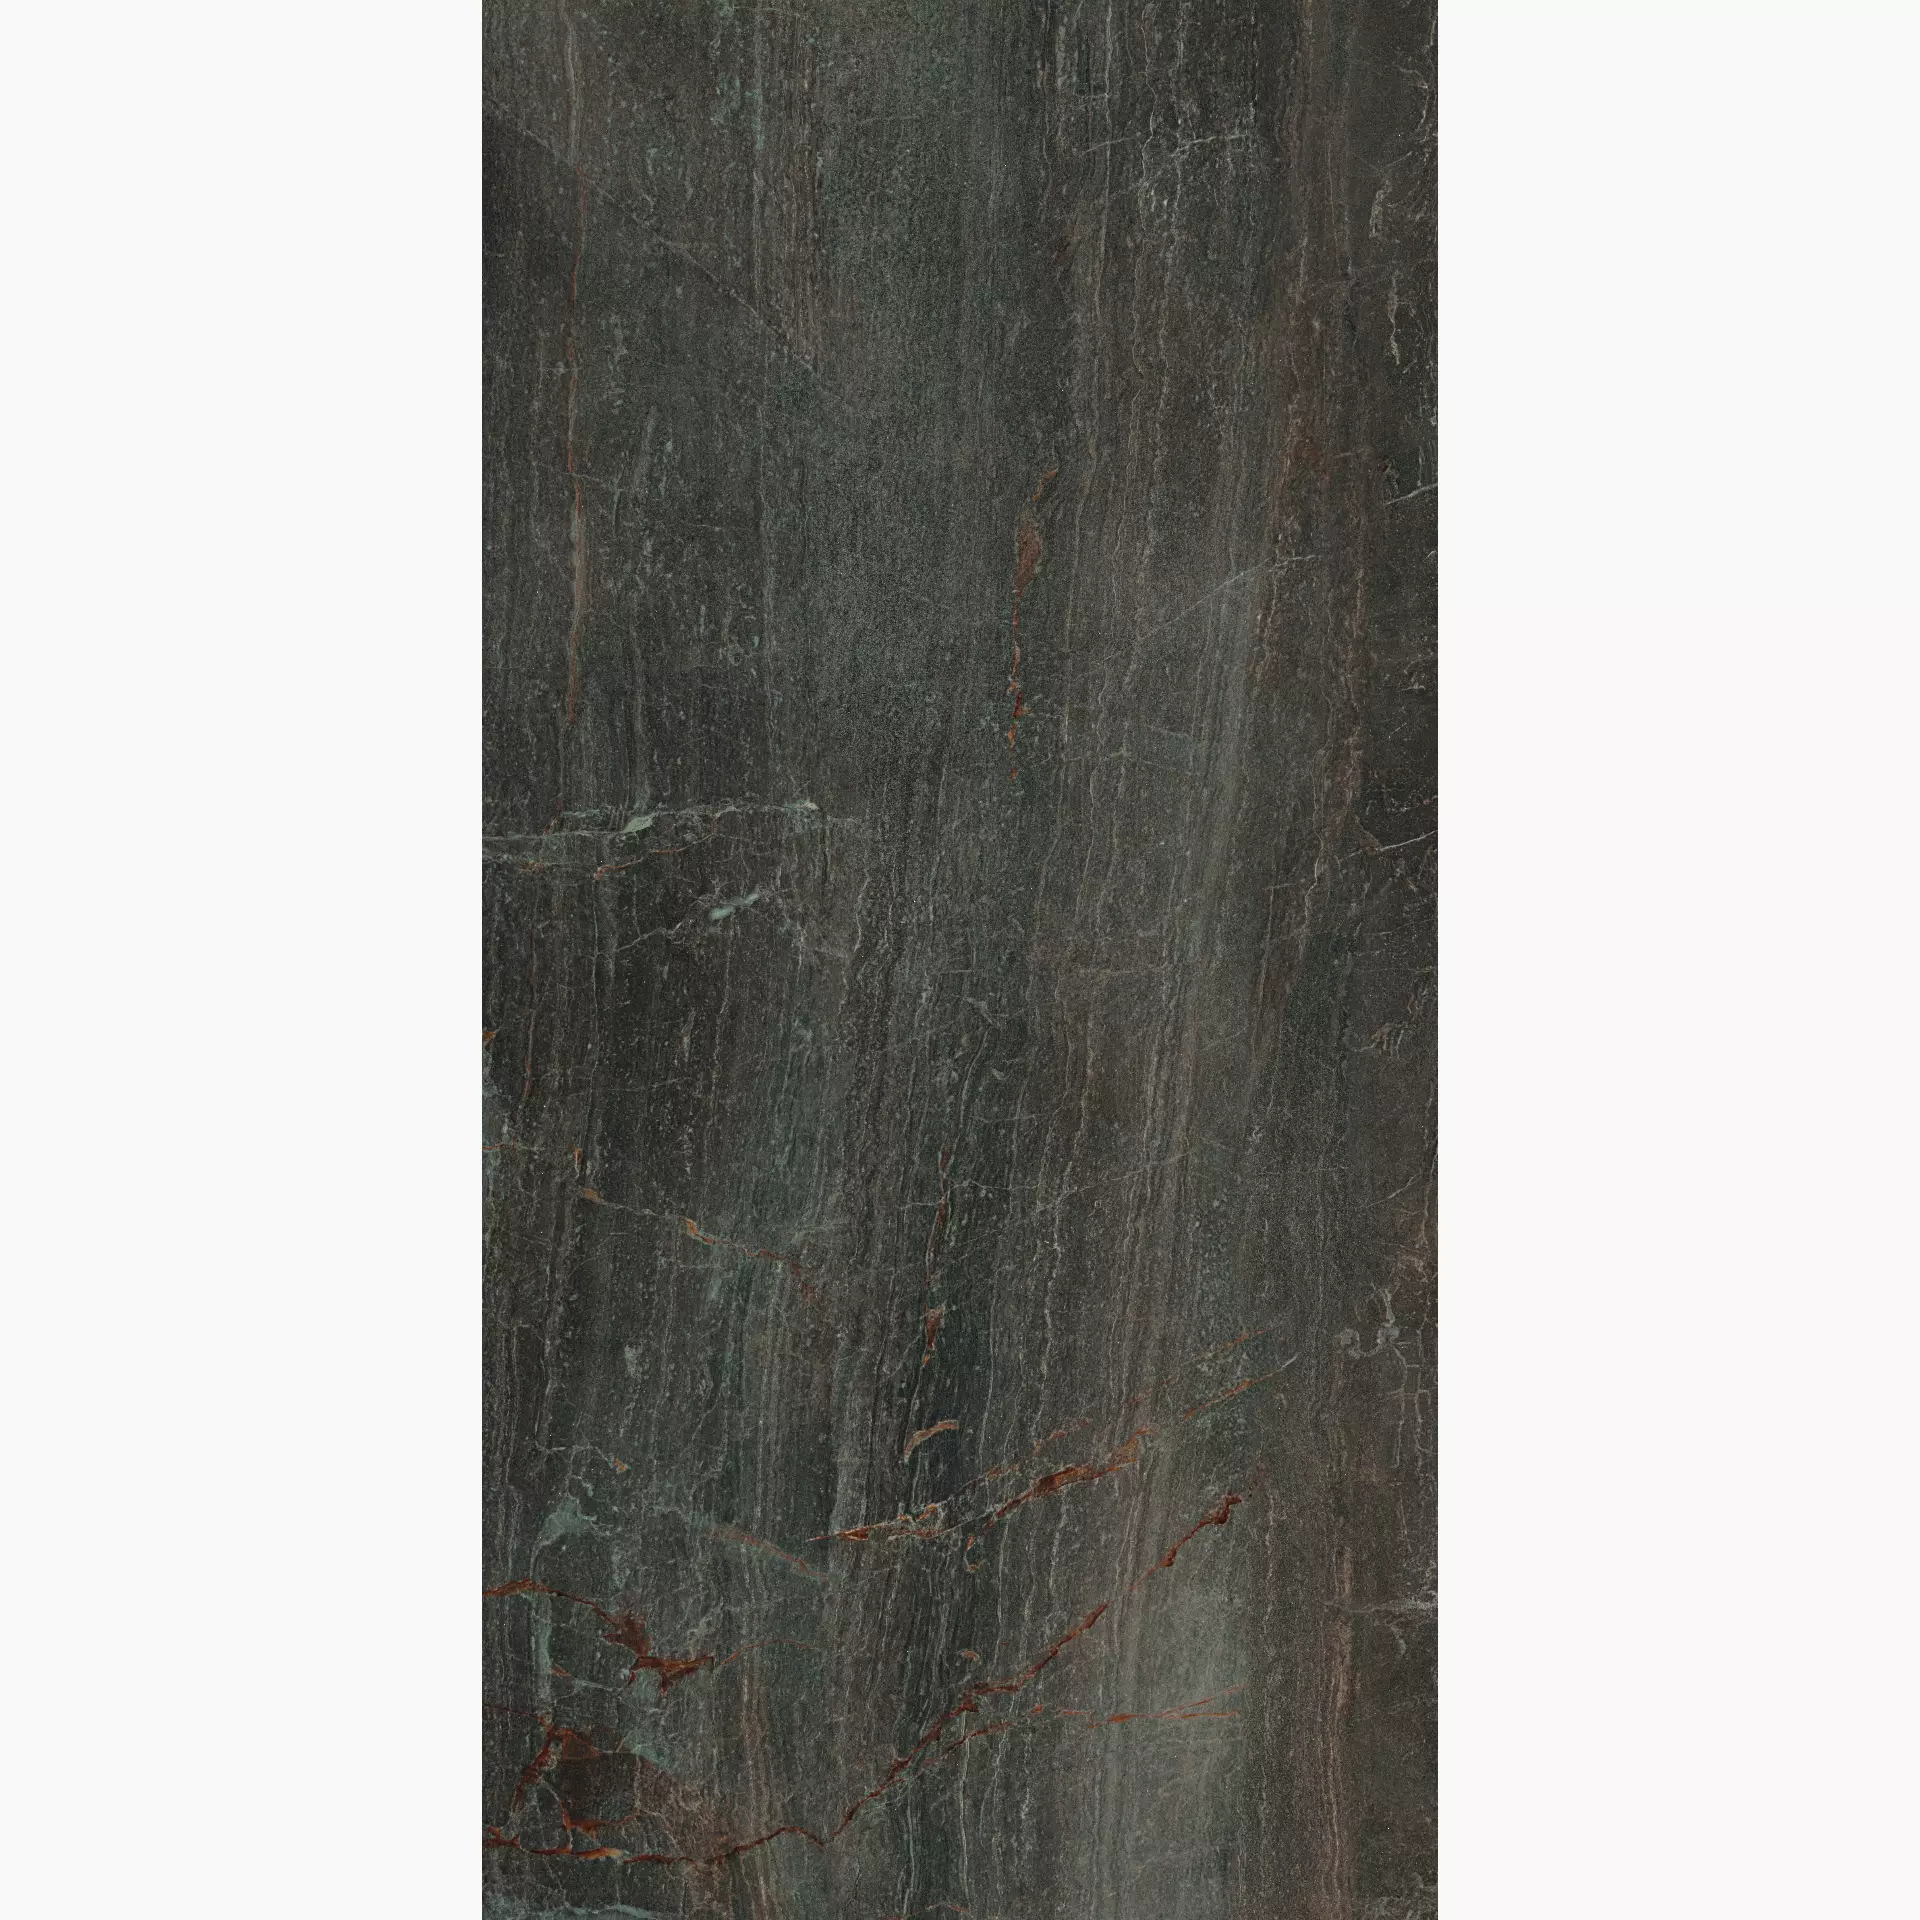 Serenissima Fossil Bruno Lux 1066566 60x120cm rectified 9,5mm